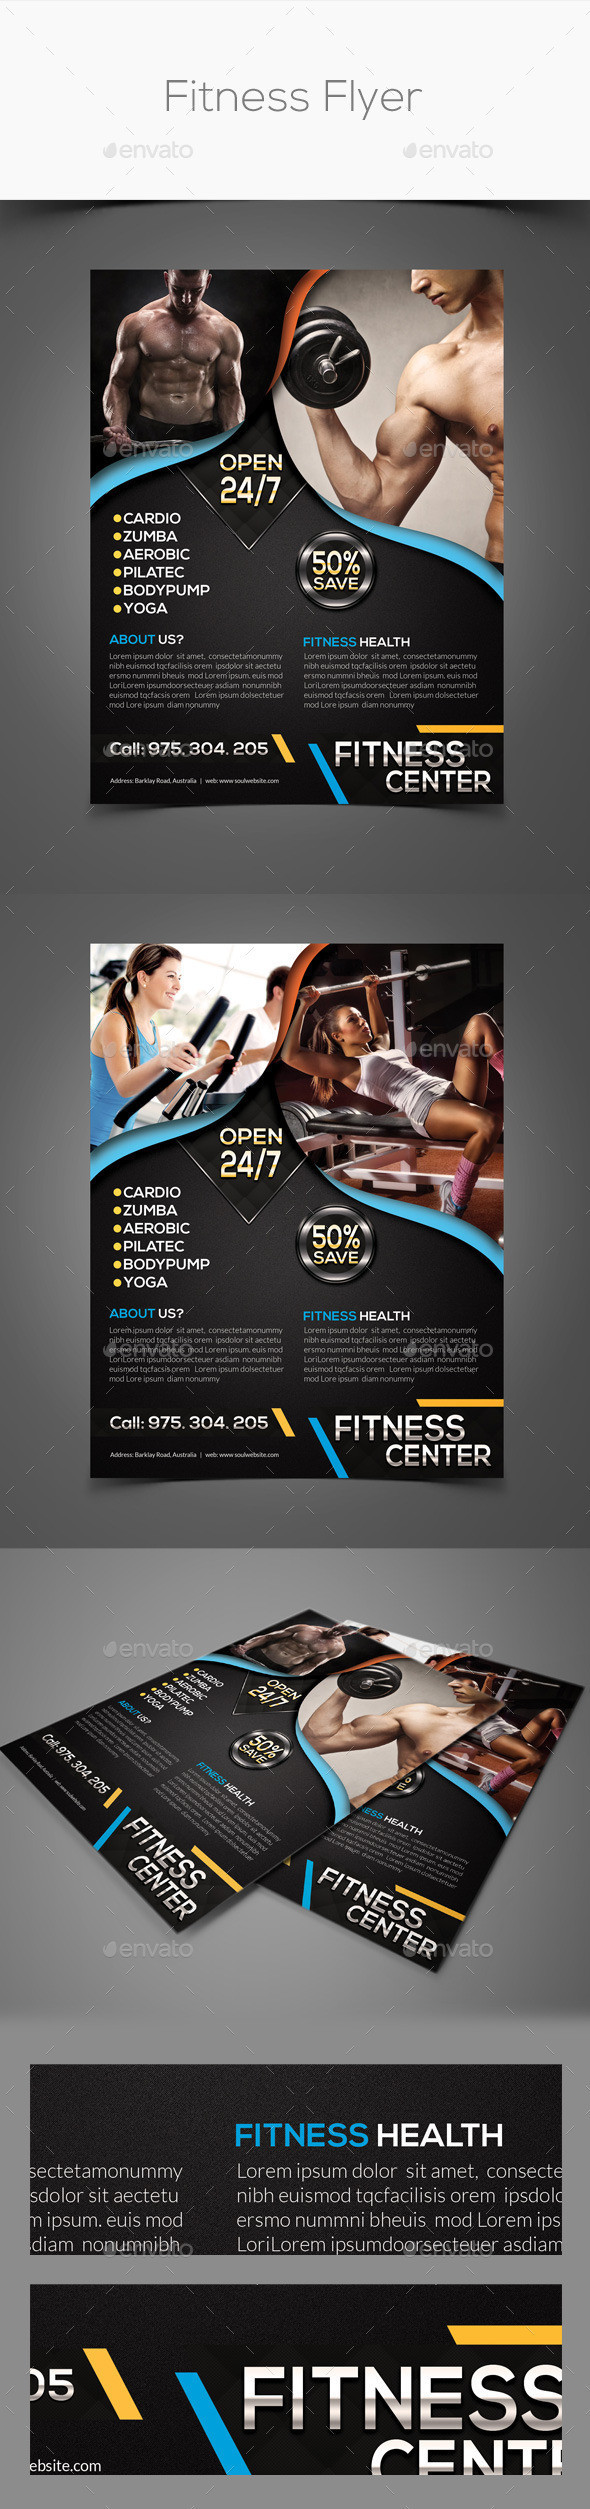 Fitness flyer preview